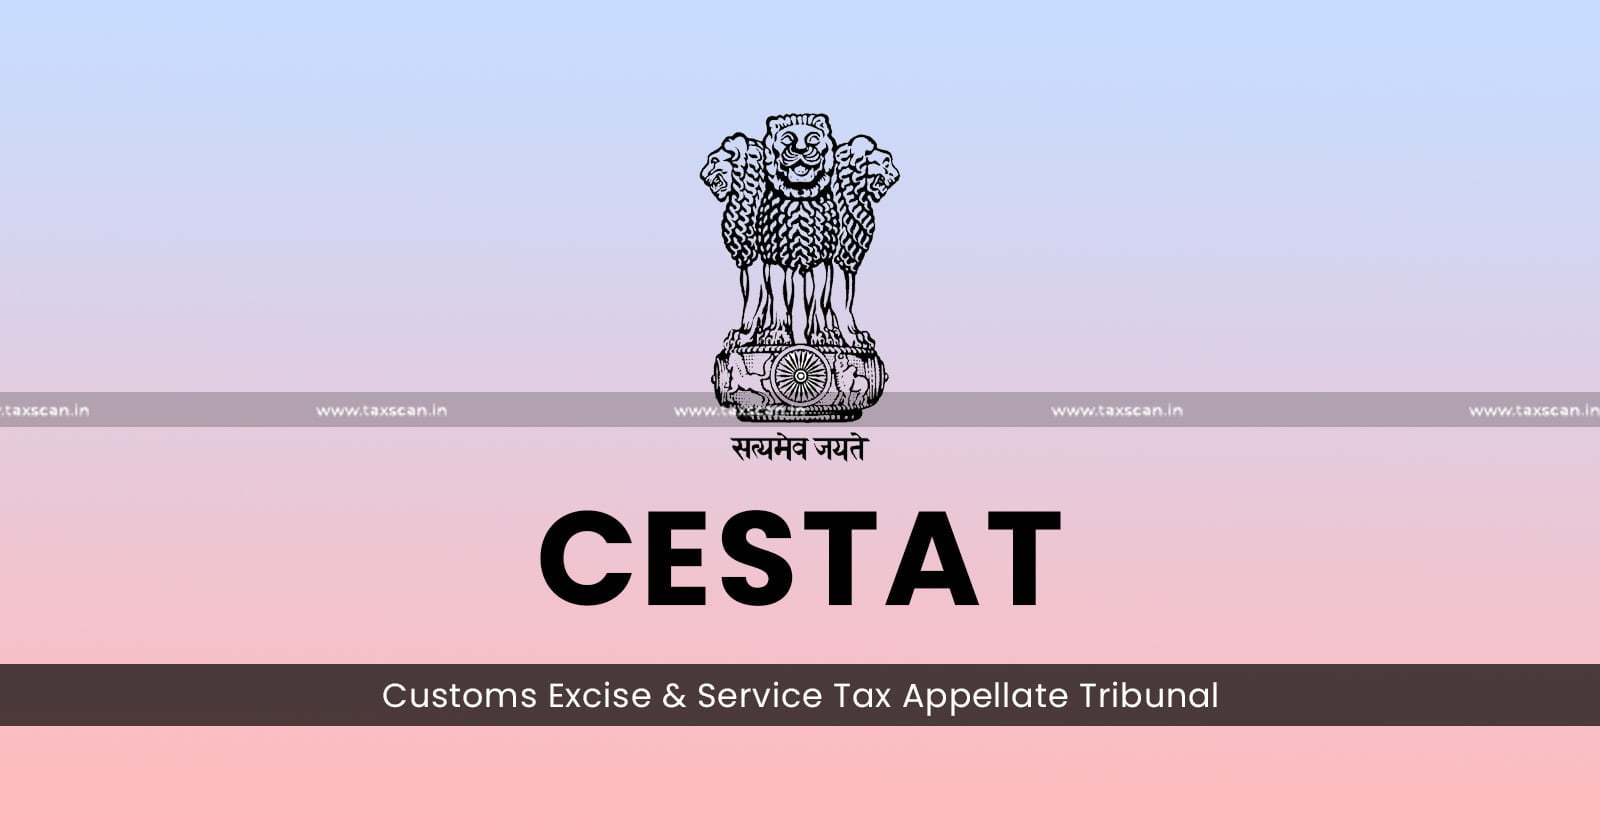 Availment - Condition Based Excise - Exemption Notification - Assessee - CESTAT - taxscan